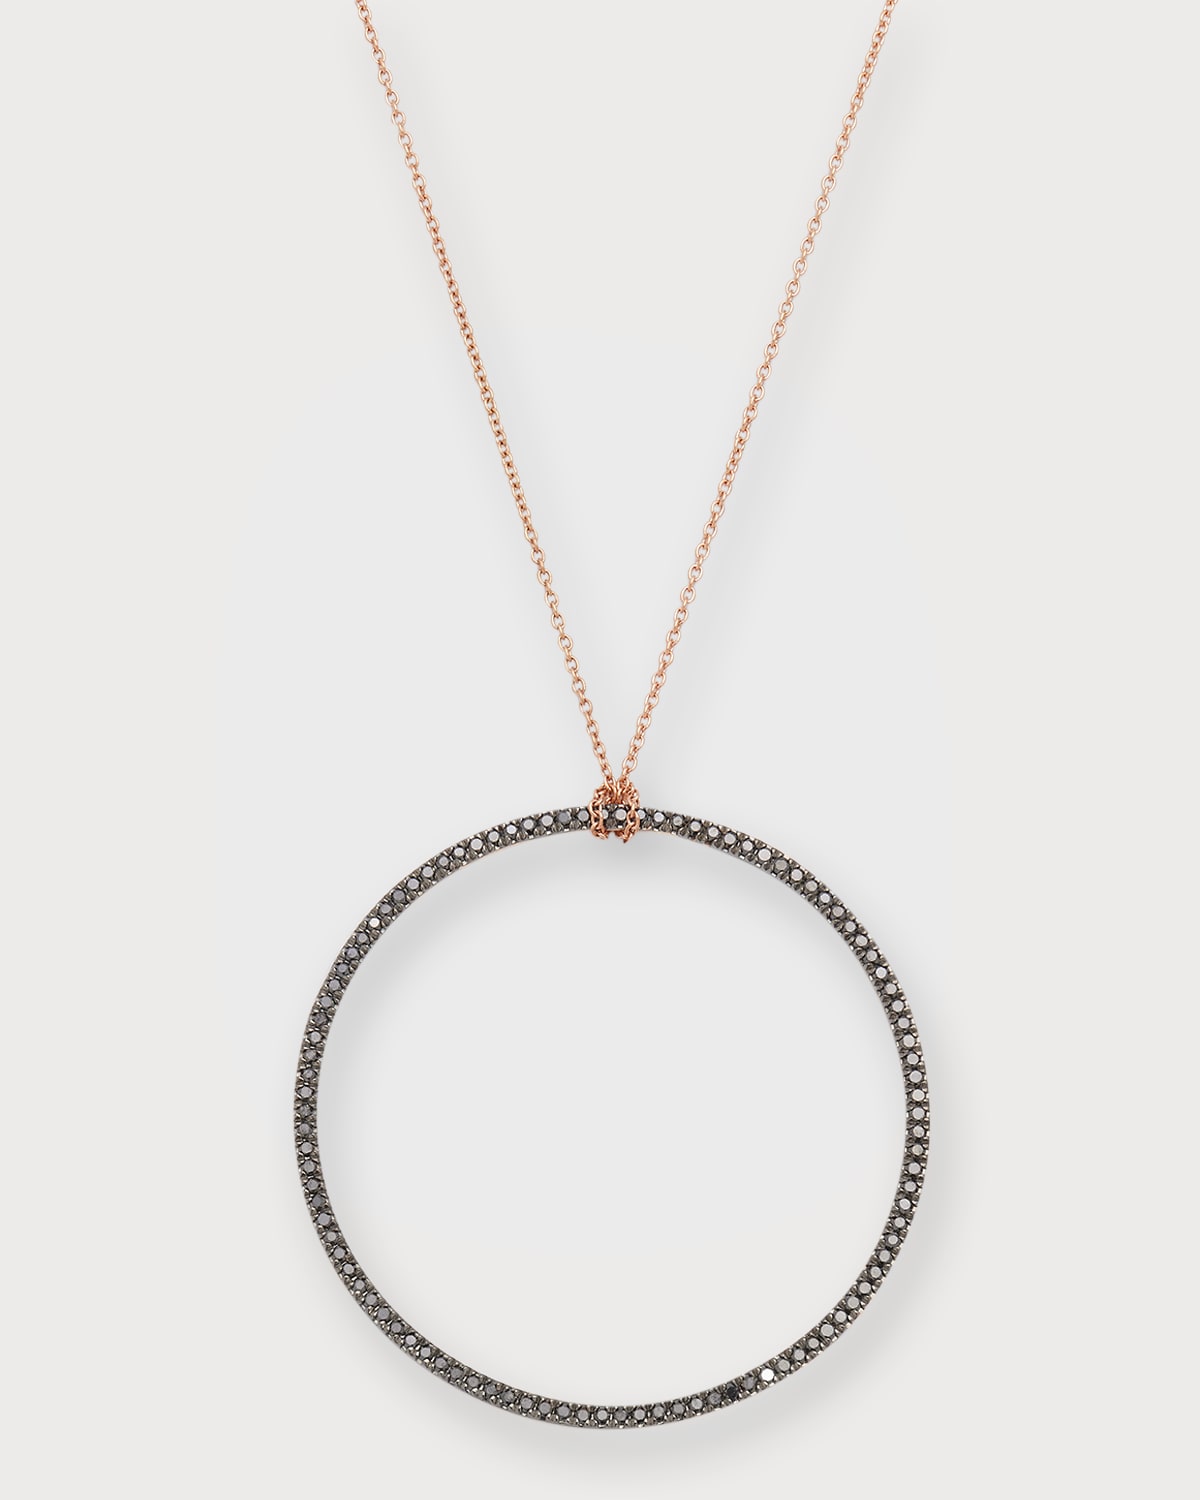 Ginette Ny 18k Rose Gold Black Diamond Circle On Chain Necklace